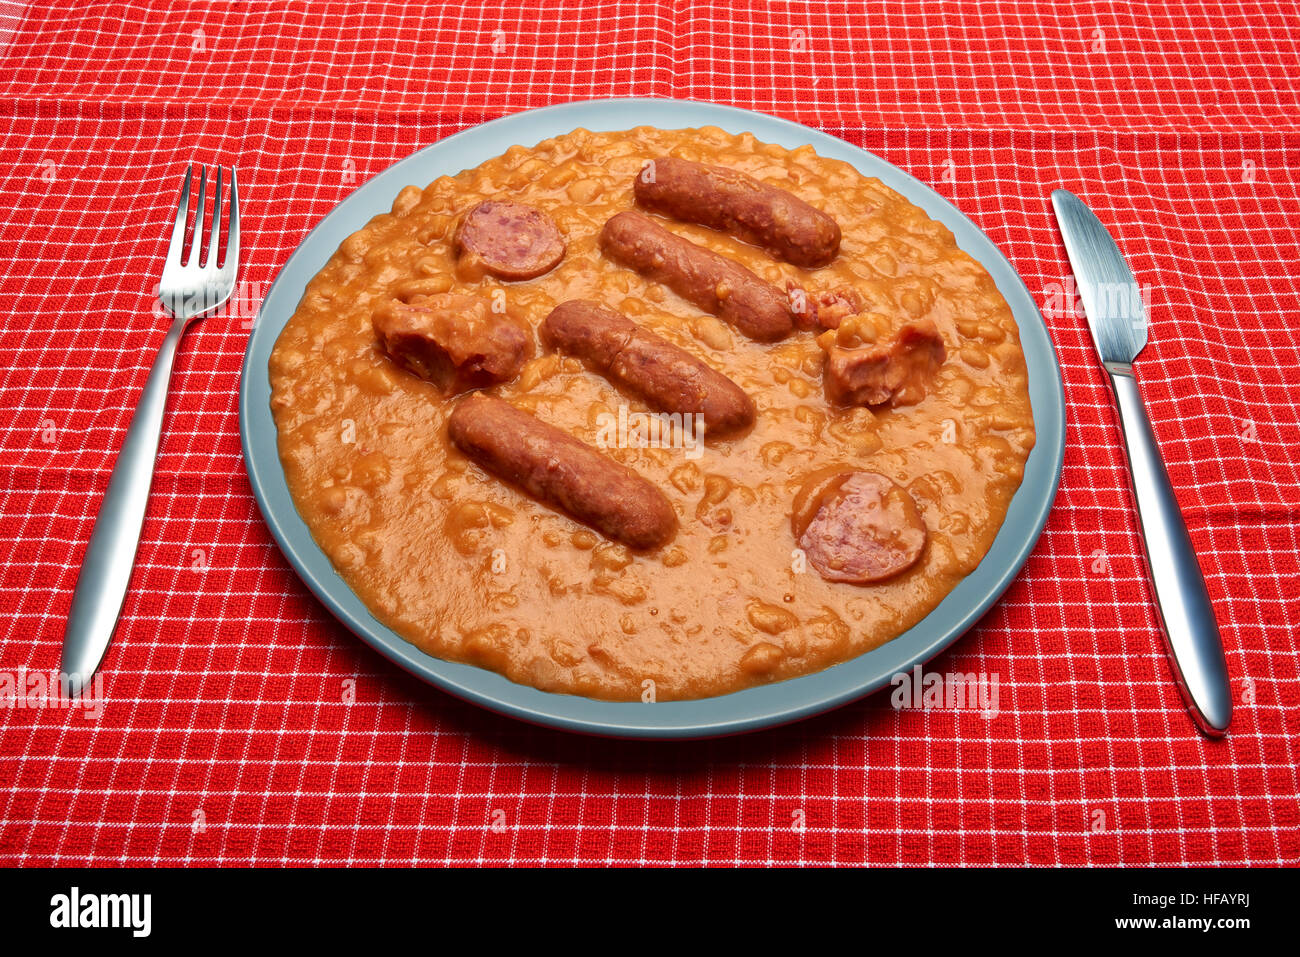 Cassoulet on blue plate and red napkin Stock Photo